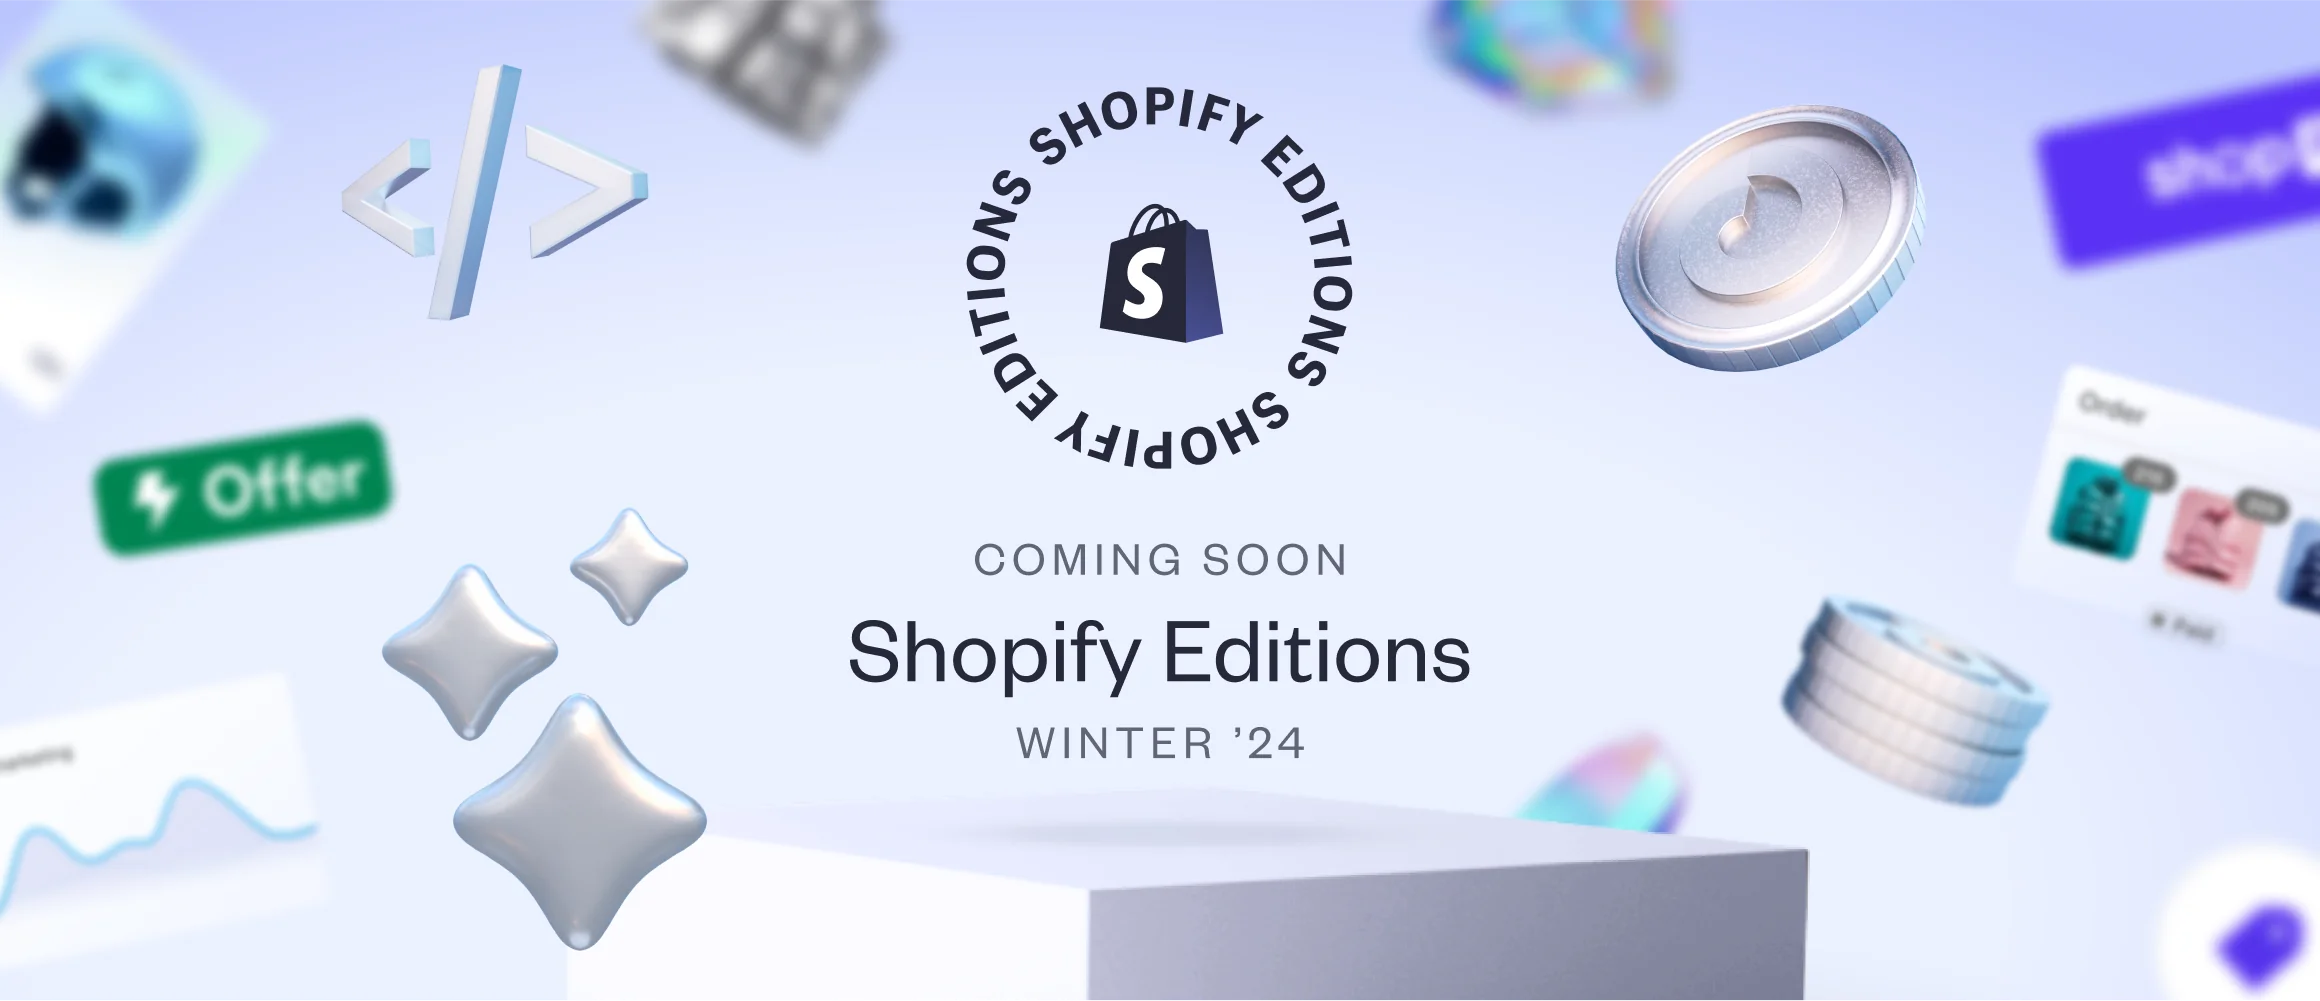 Shopify’s 24’ Winter Edition